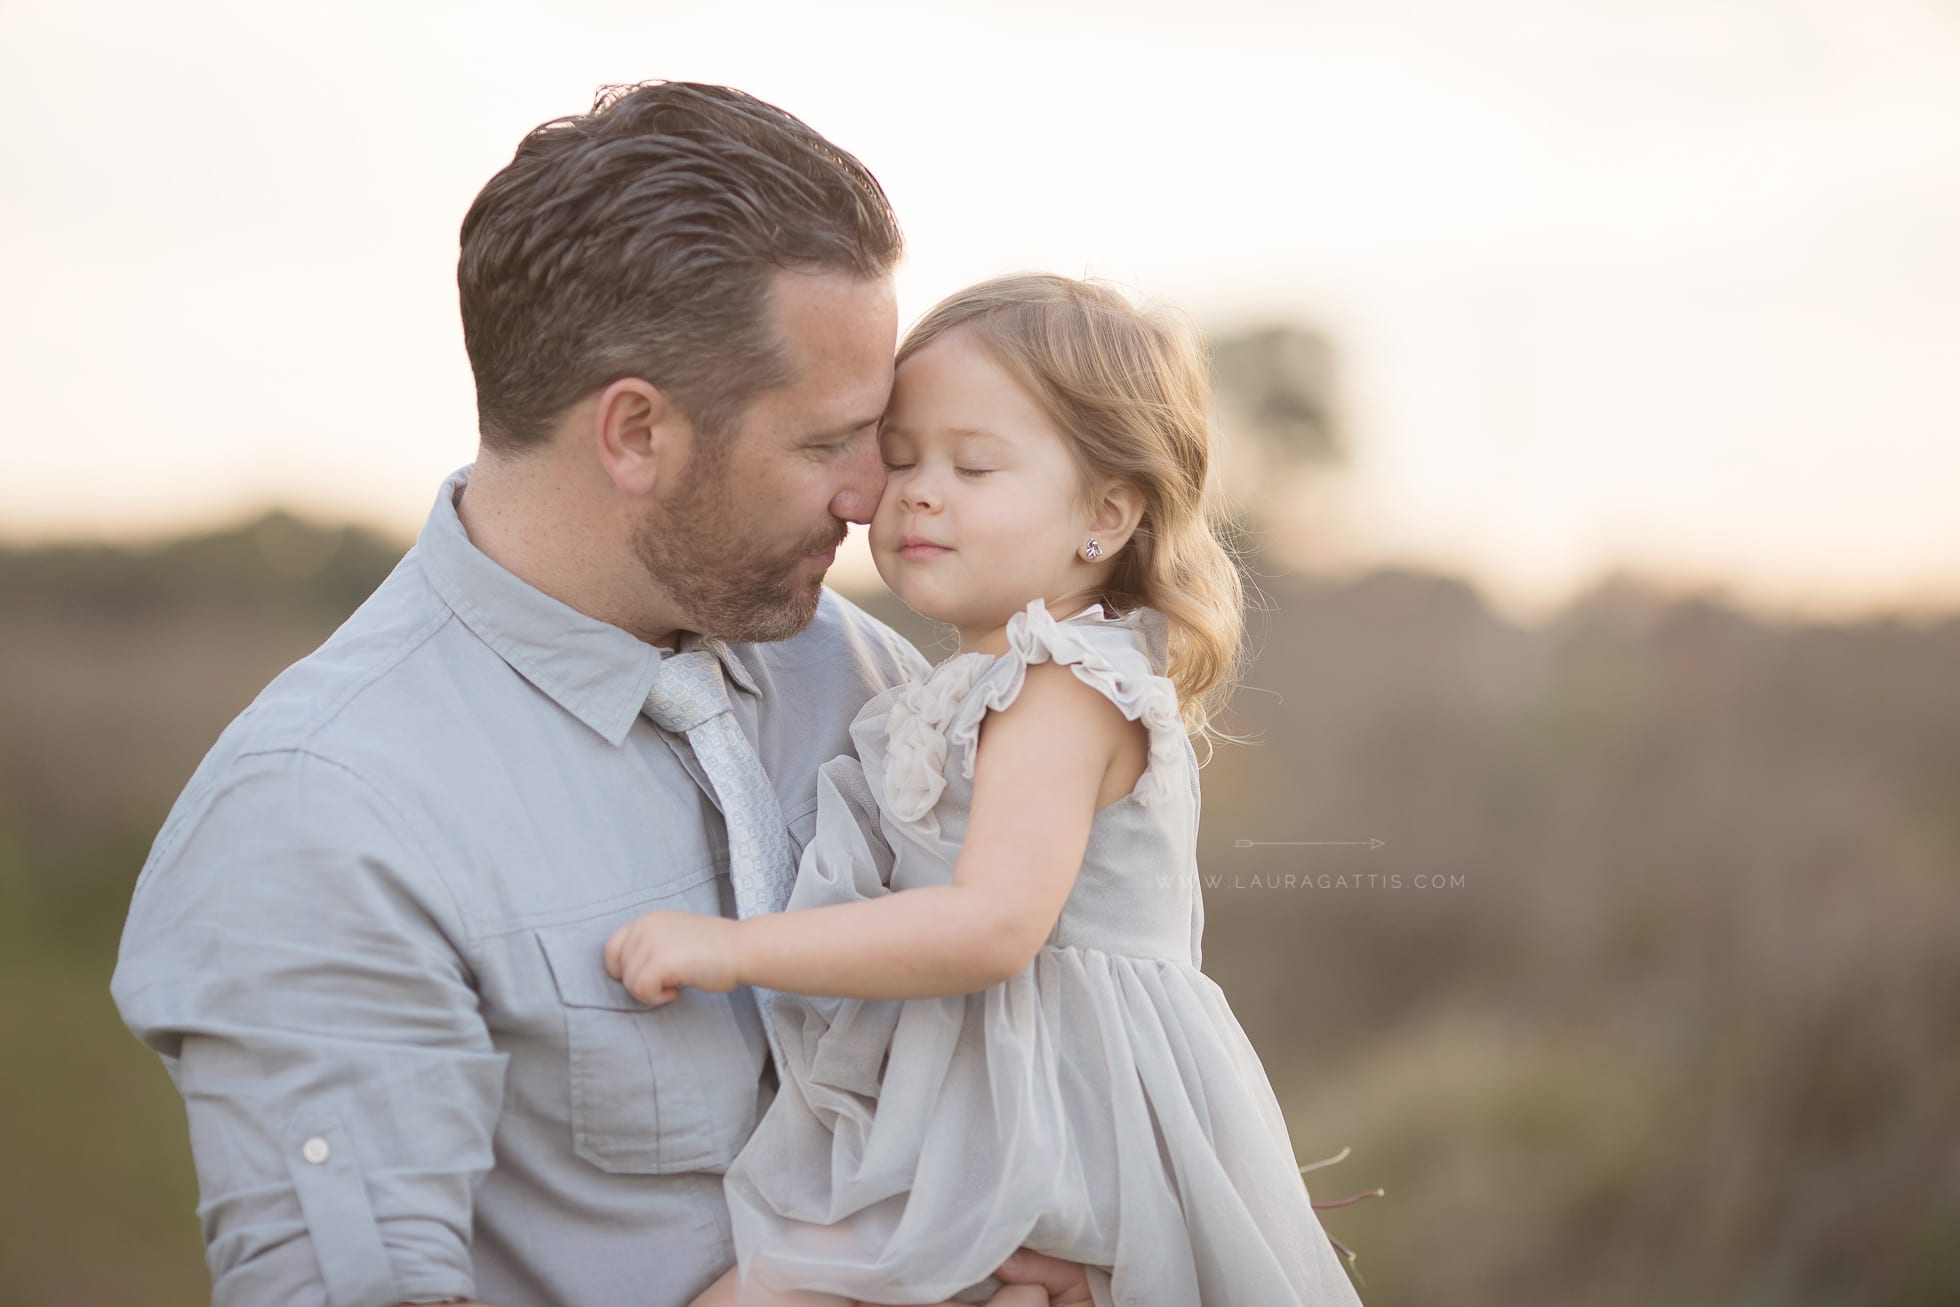 beautiful family connections | laura gattis photography